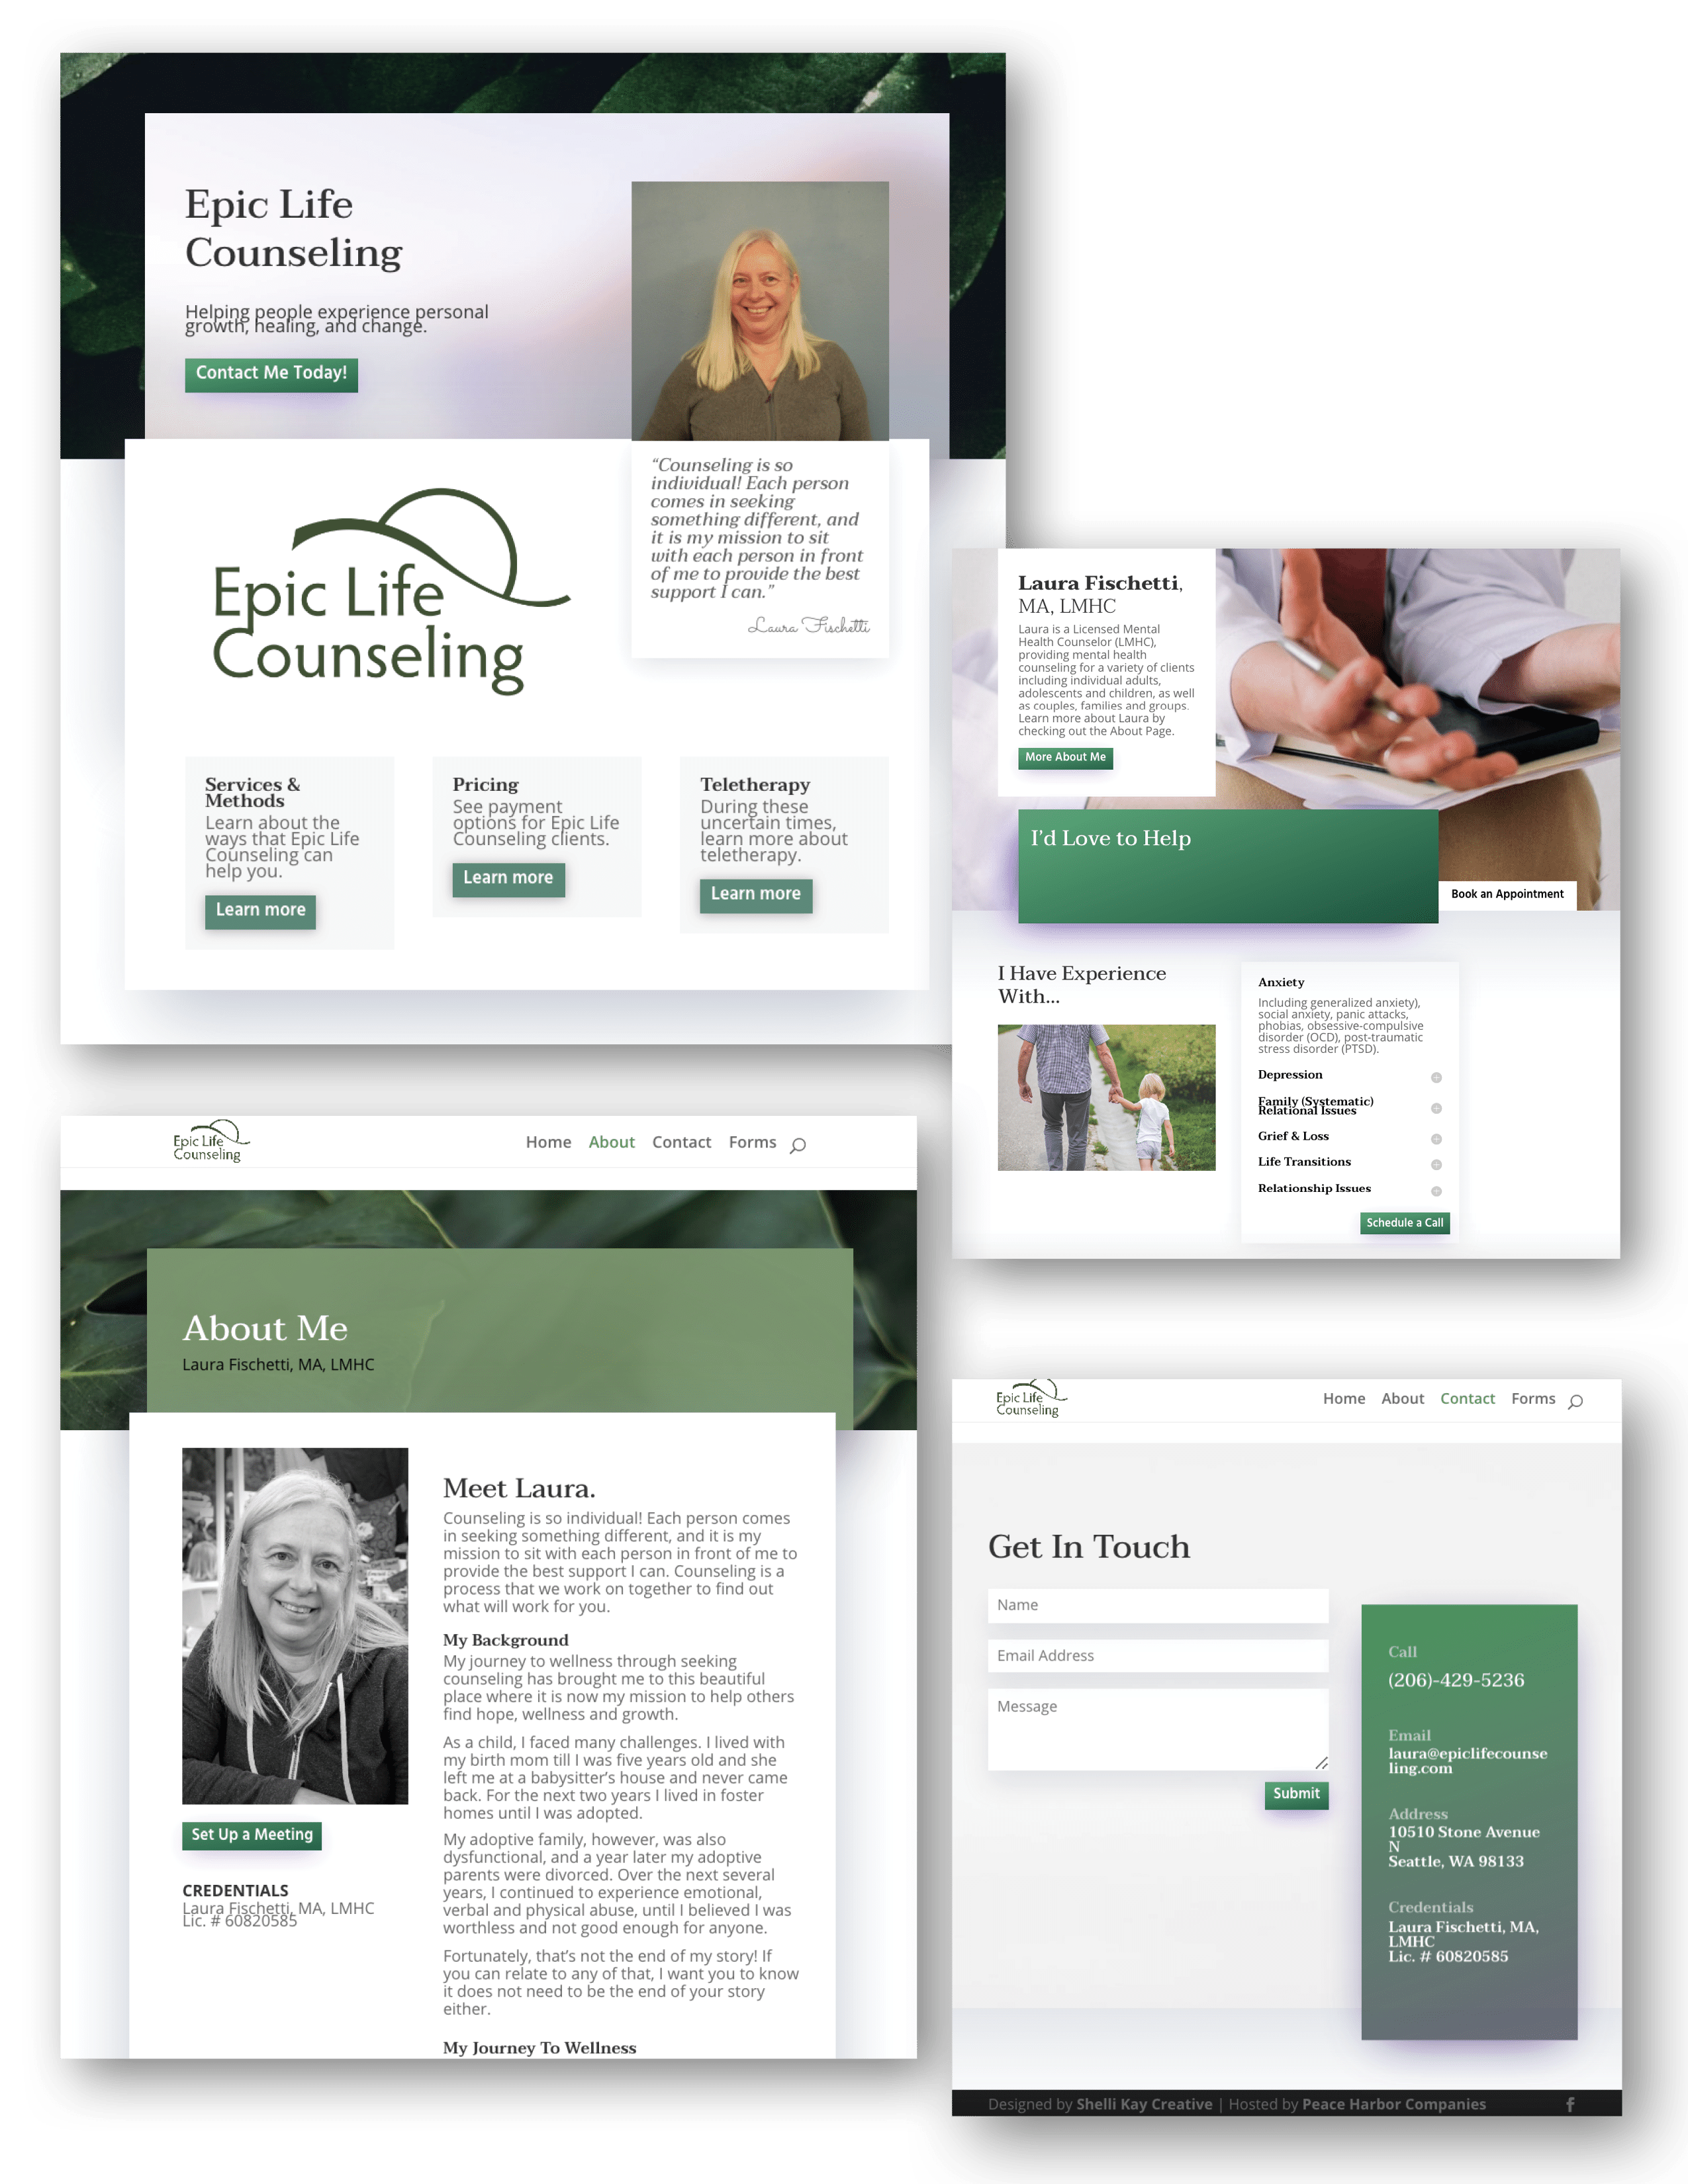 Website Revamp: Epic Life Counseling